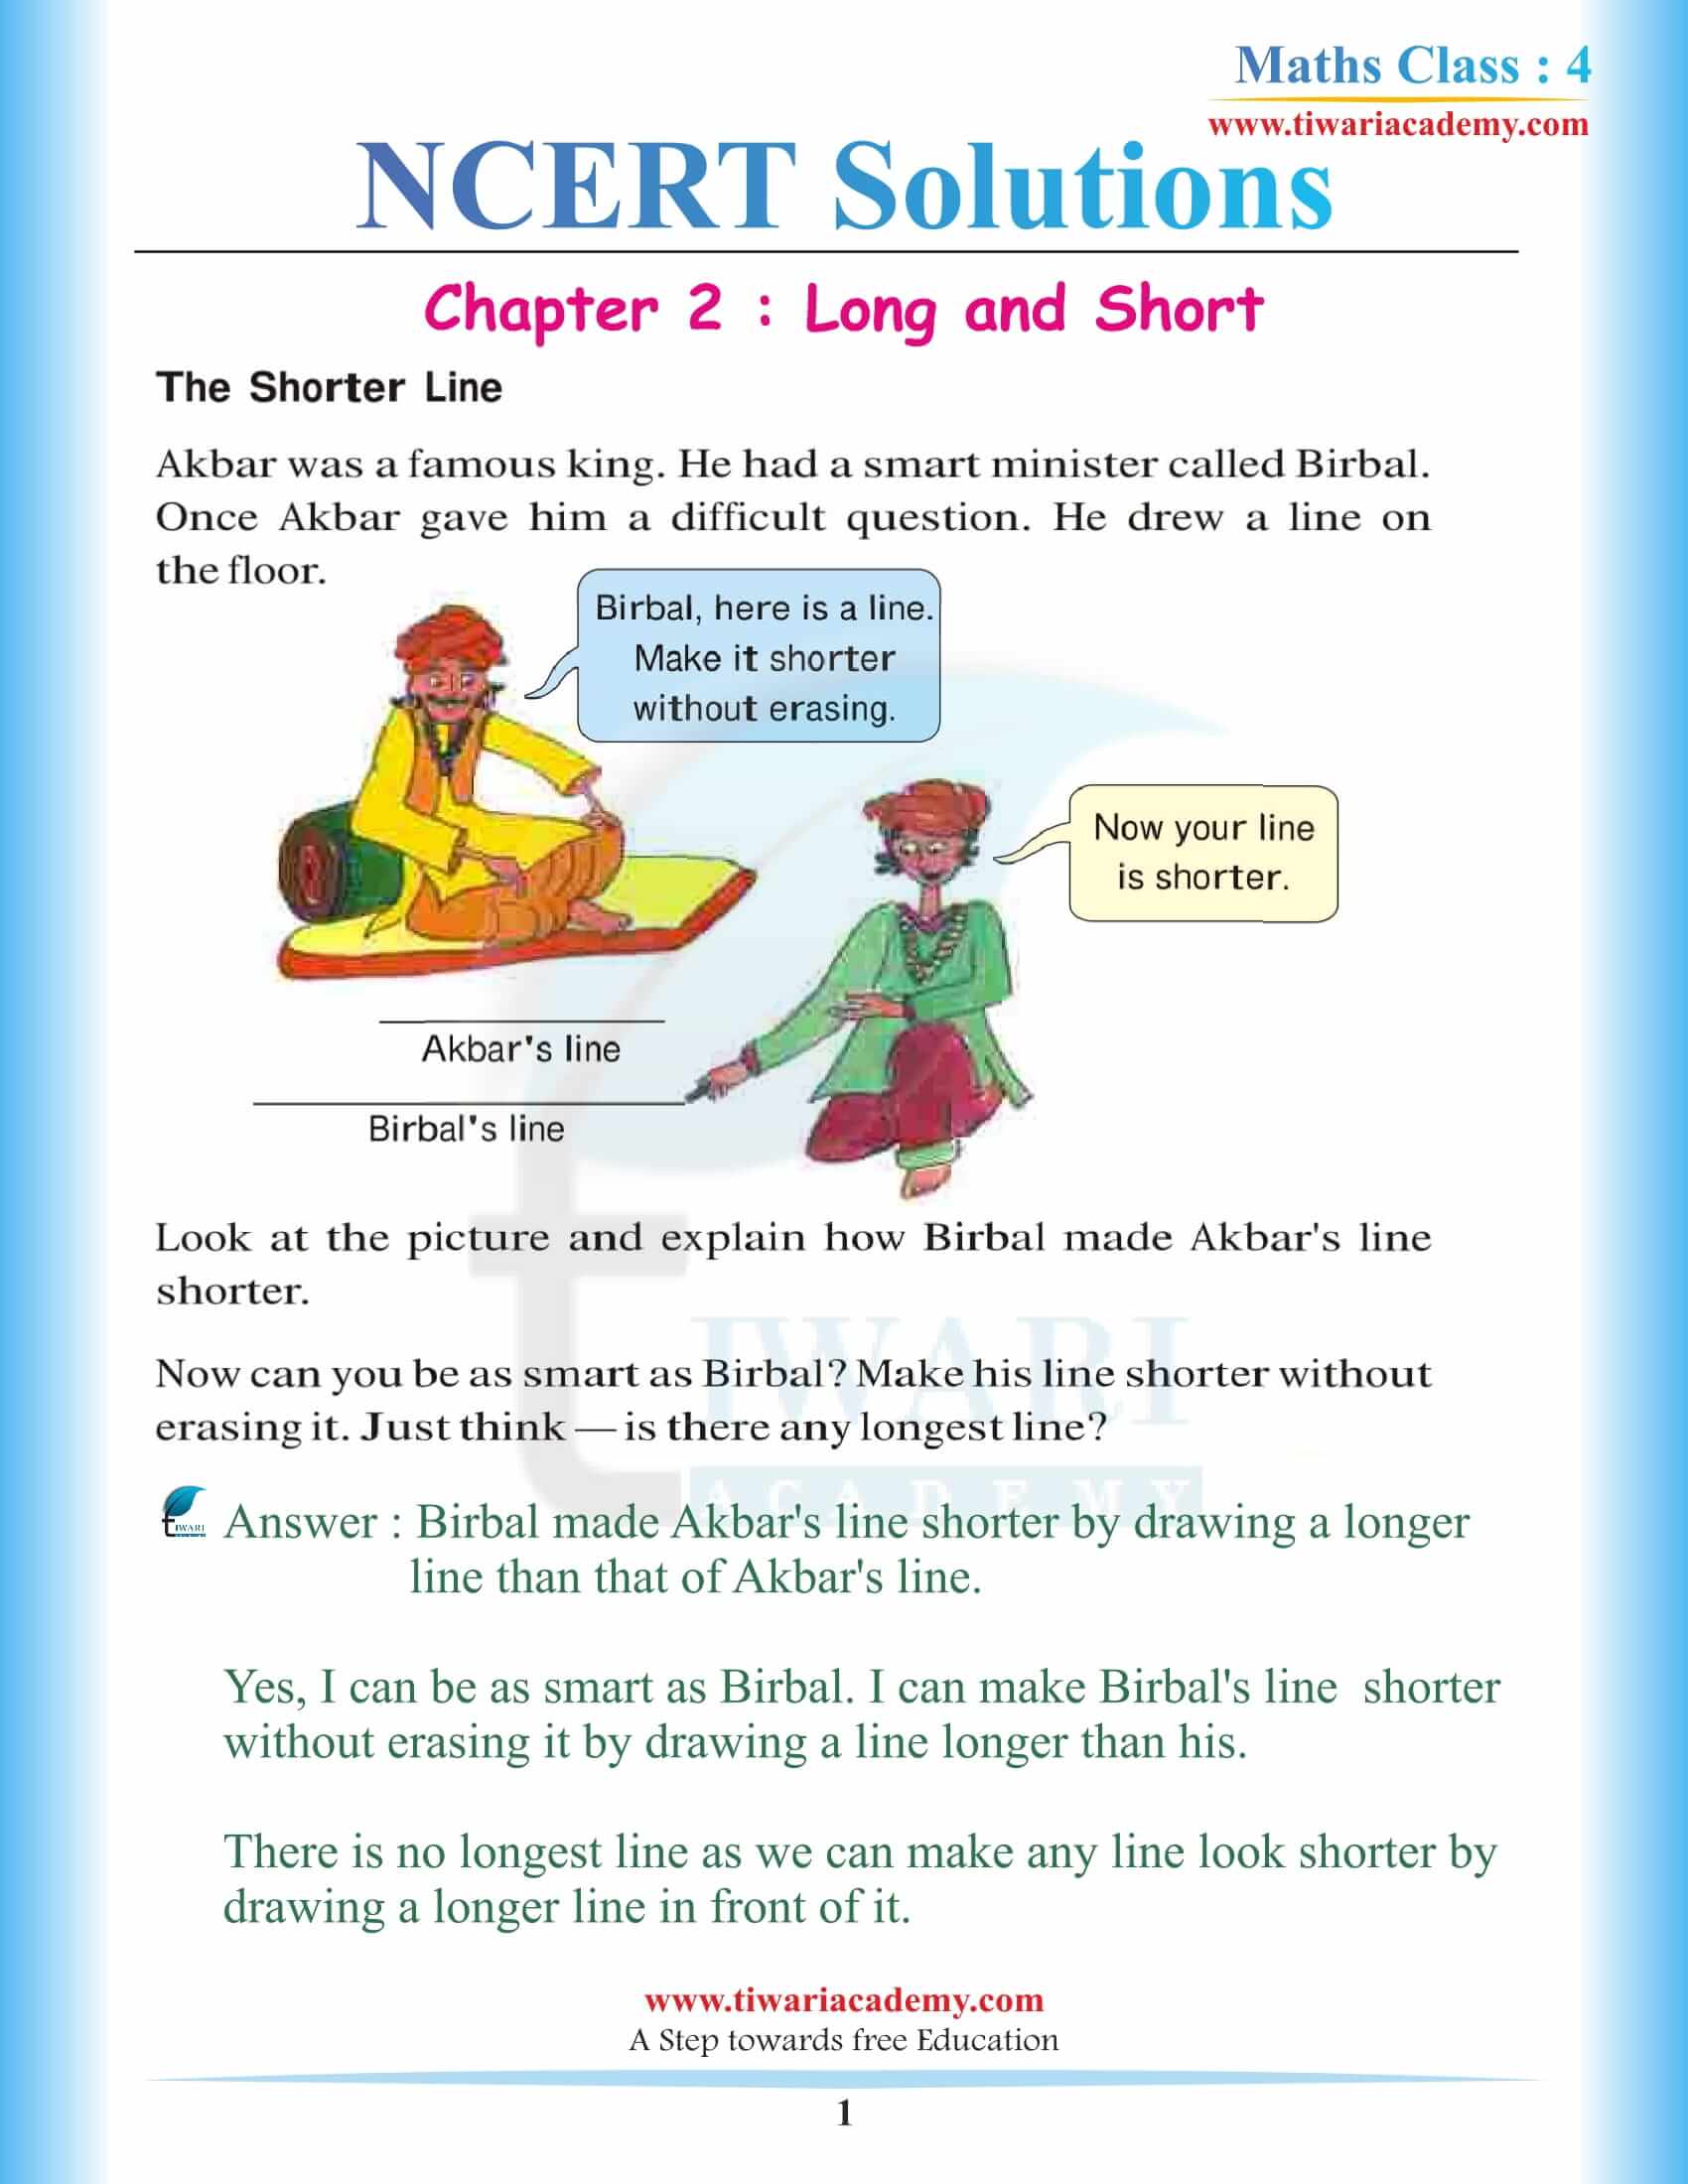 NCERT Solutions for Class 4 Maths Chapter 2 Long and Short